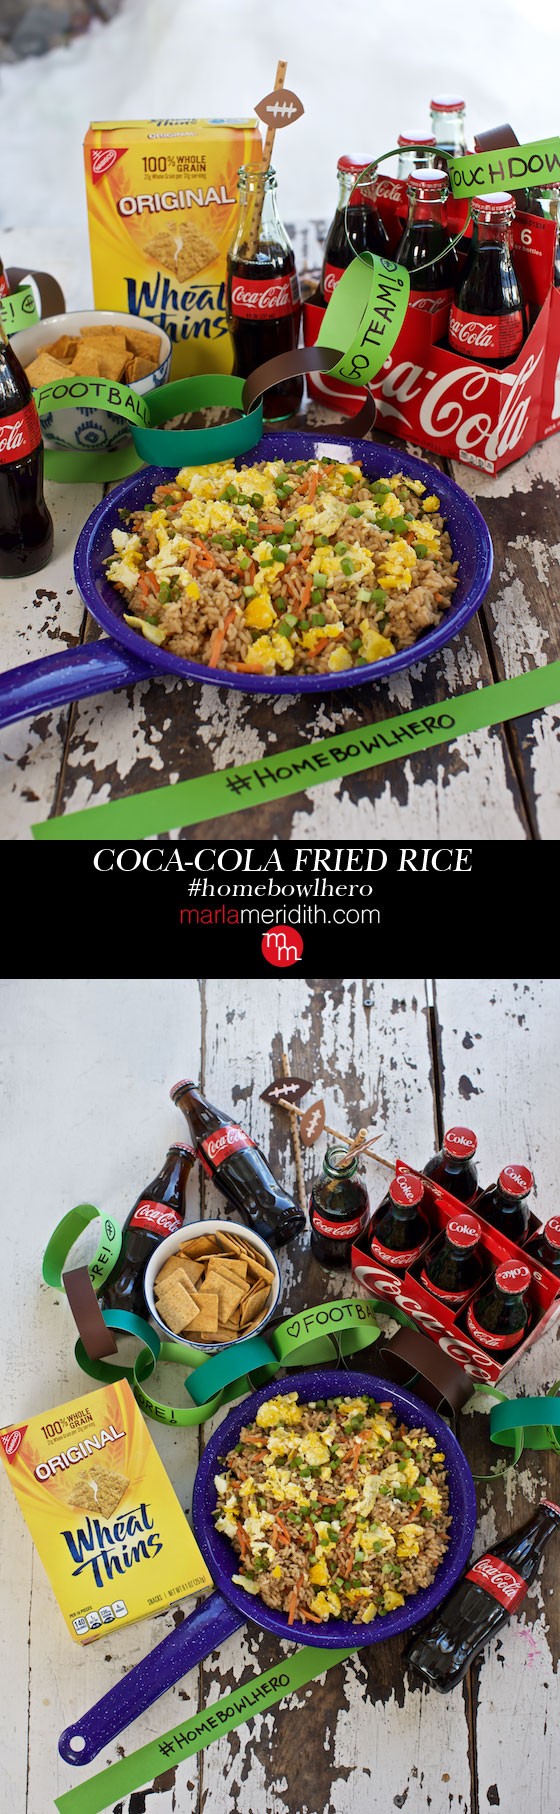 Coca-Cola Fried Rice & #HomeBowlHero Contest for Game Day! MarlaMeridith.com ( @marlameridith )